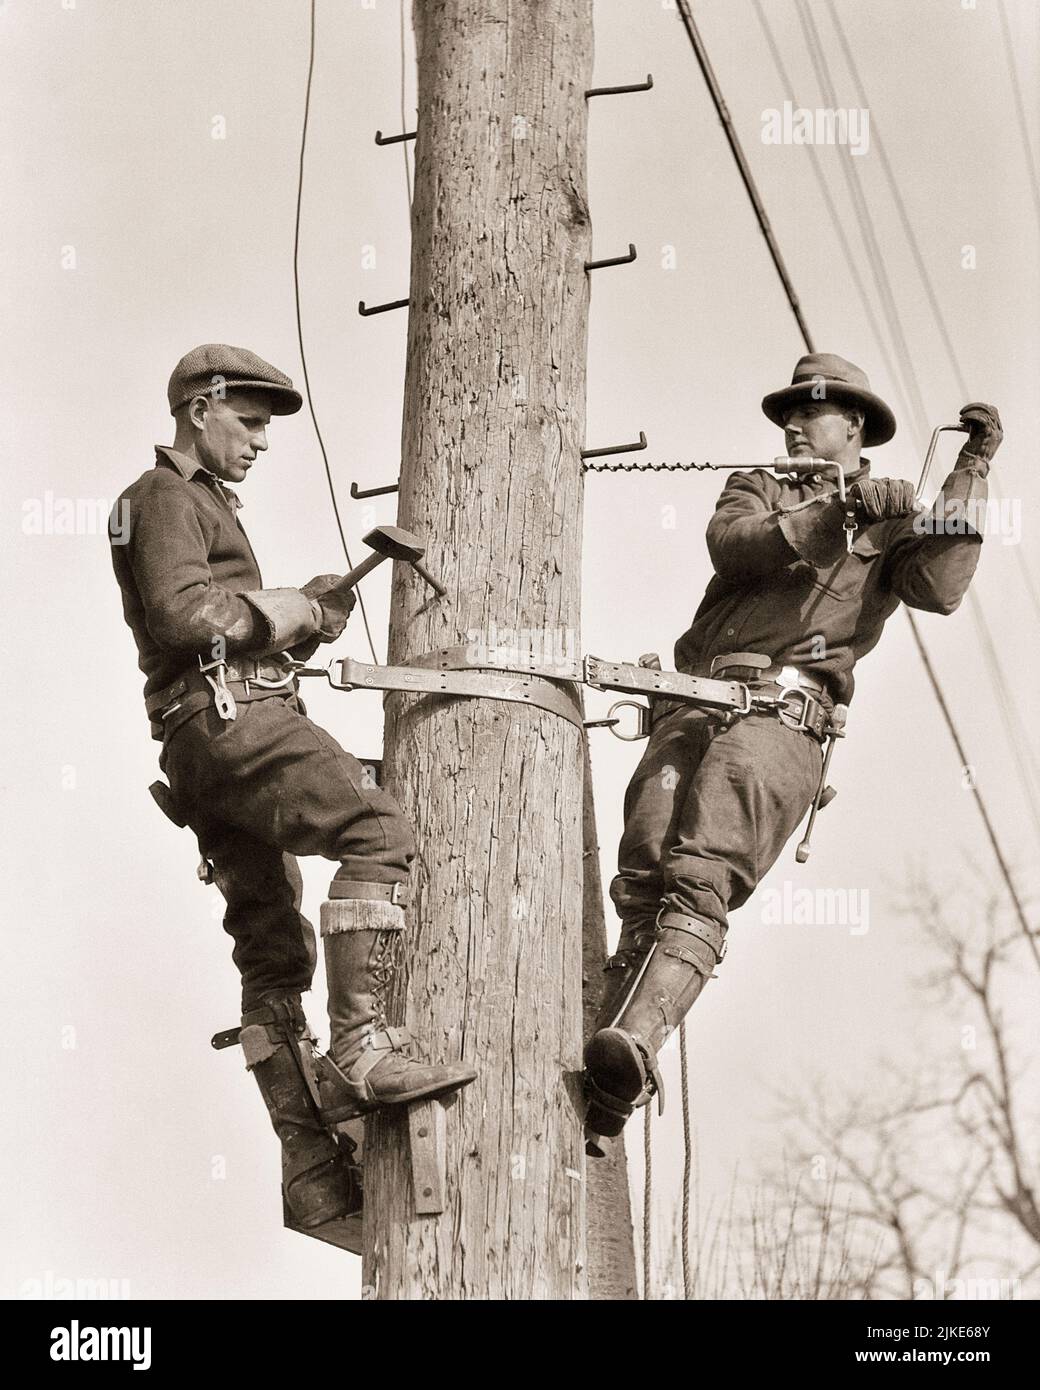 1930s TWO MEN WORKING ON UTILITY POLE DRILLING HOLES FOR INSTALLATION OF METAL BRACKETS - i604 HAR001 HARS SKILLS BUILD DRILLING BASE CAREERS LOW ANGLE RECOVERY LABOR BETTER EMPLOYMENT OCCUPATIONS HOLES UTILITY INFRASTRUCTURE EMPLOYEE FACILITIES CORE MID-ADULT MID-ADULT MAN SYSTEMS BLACK AND WHITE CAUCASIAN ETHNICITY ECONOMY HAR001 INSTALLATION LABORING OLD FASHIONED Stock Photo